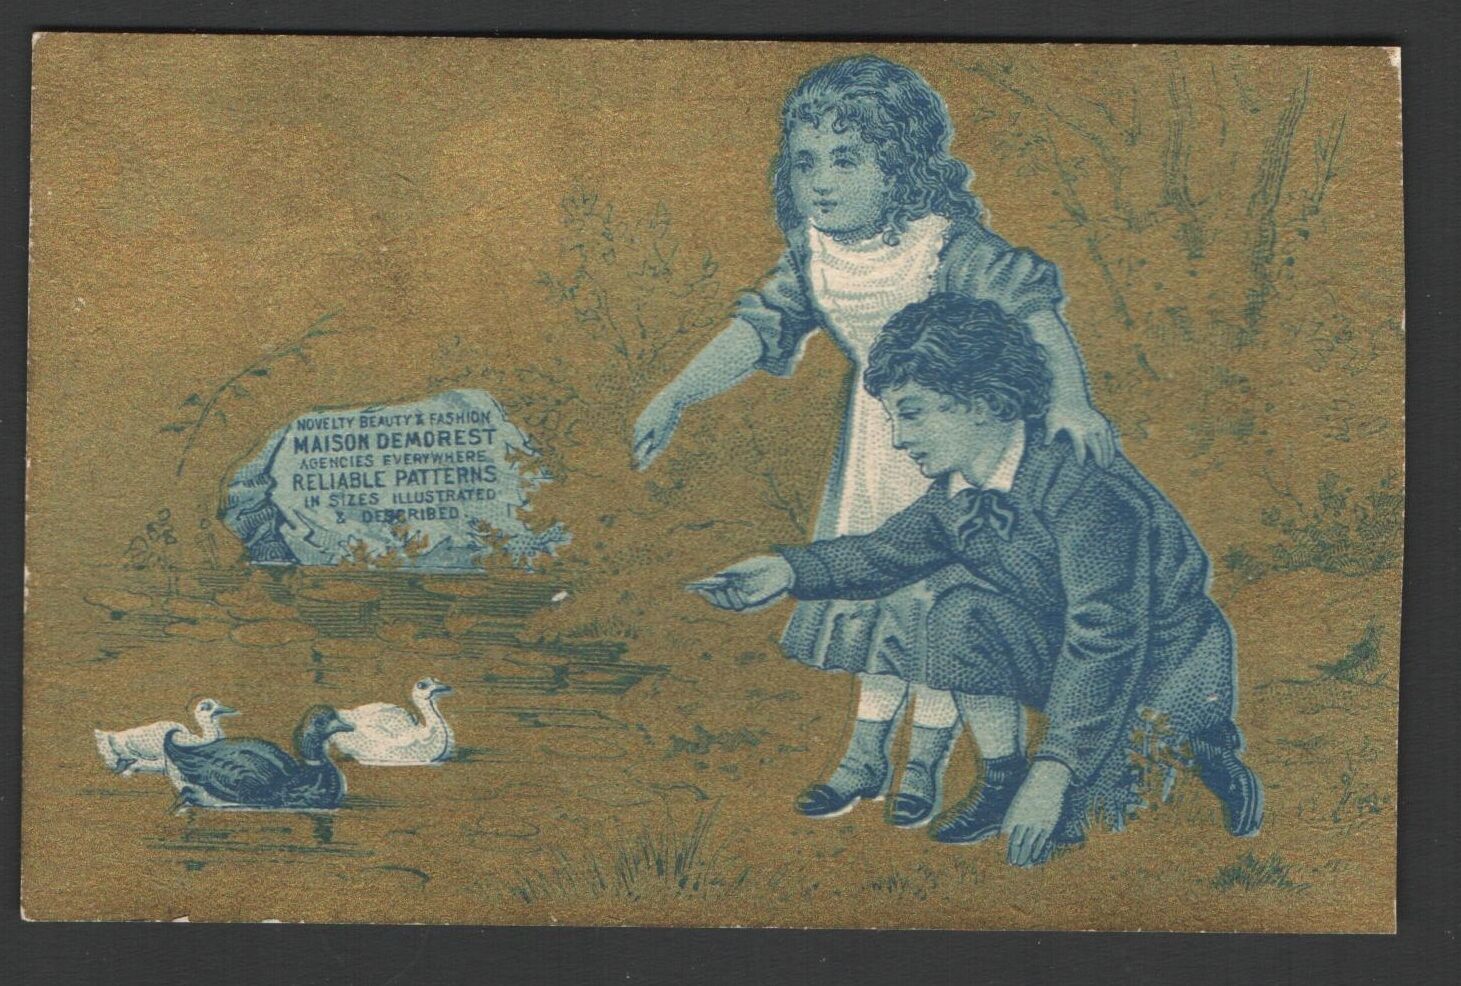  Kids Feeding Ducks Maison Demorest Reliable Patterns OLD Advertising Trade Card